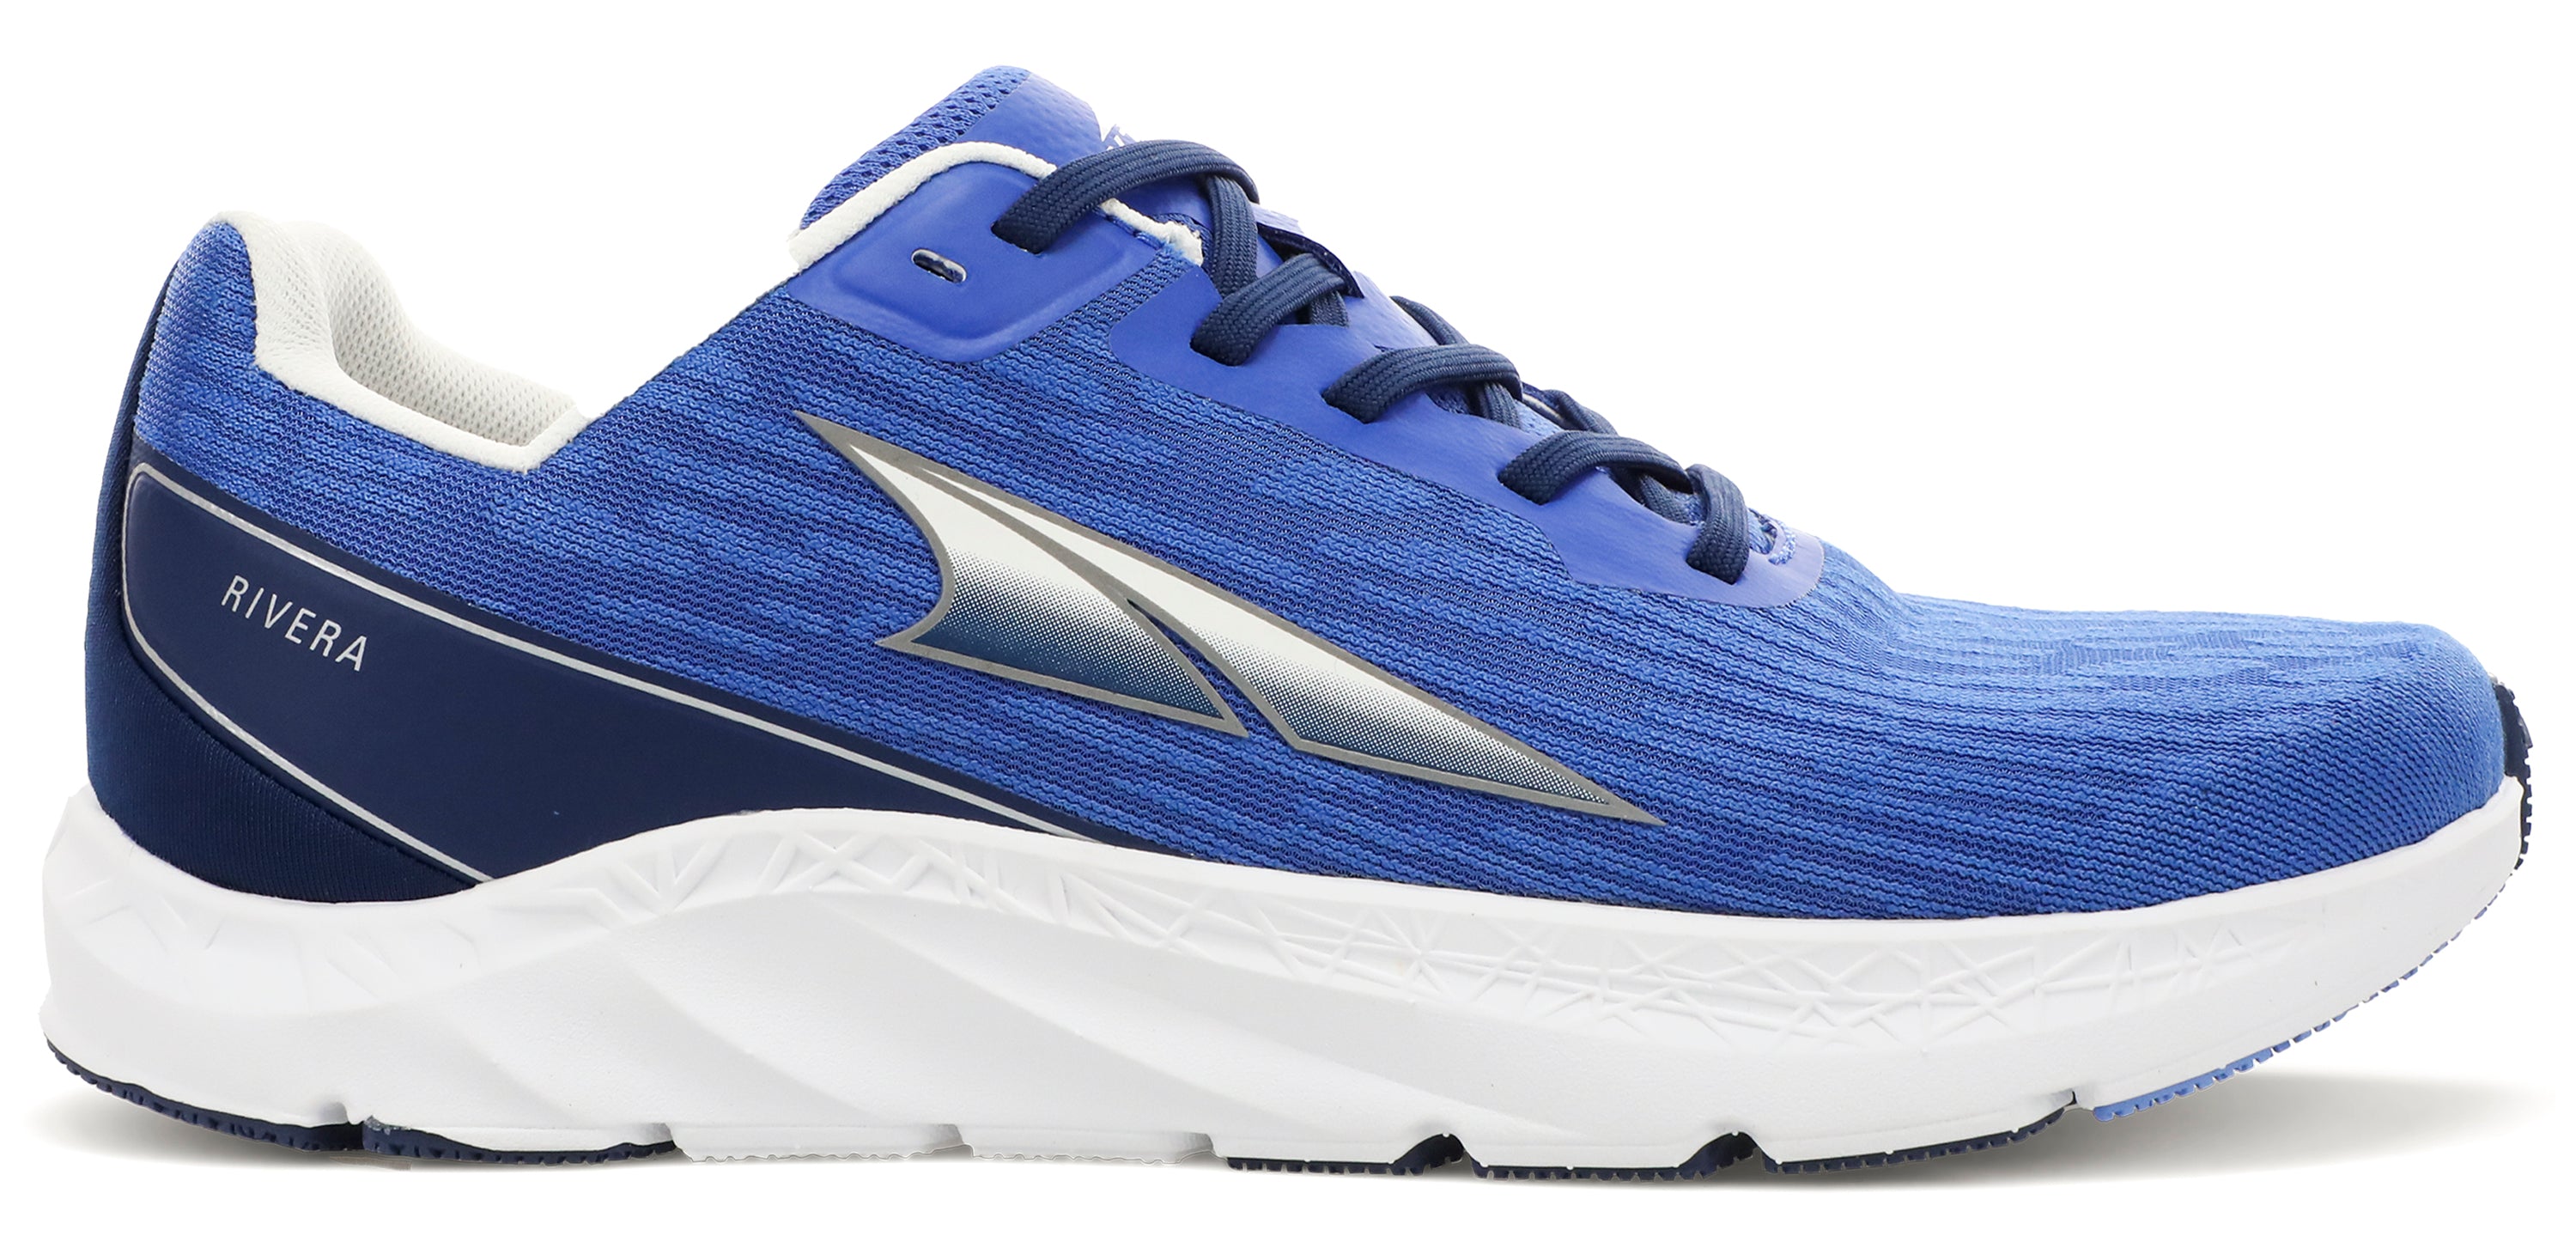 Altra Women's Rivera Road Running Shoe in Blue from the side